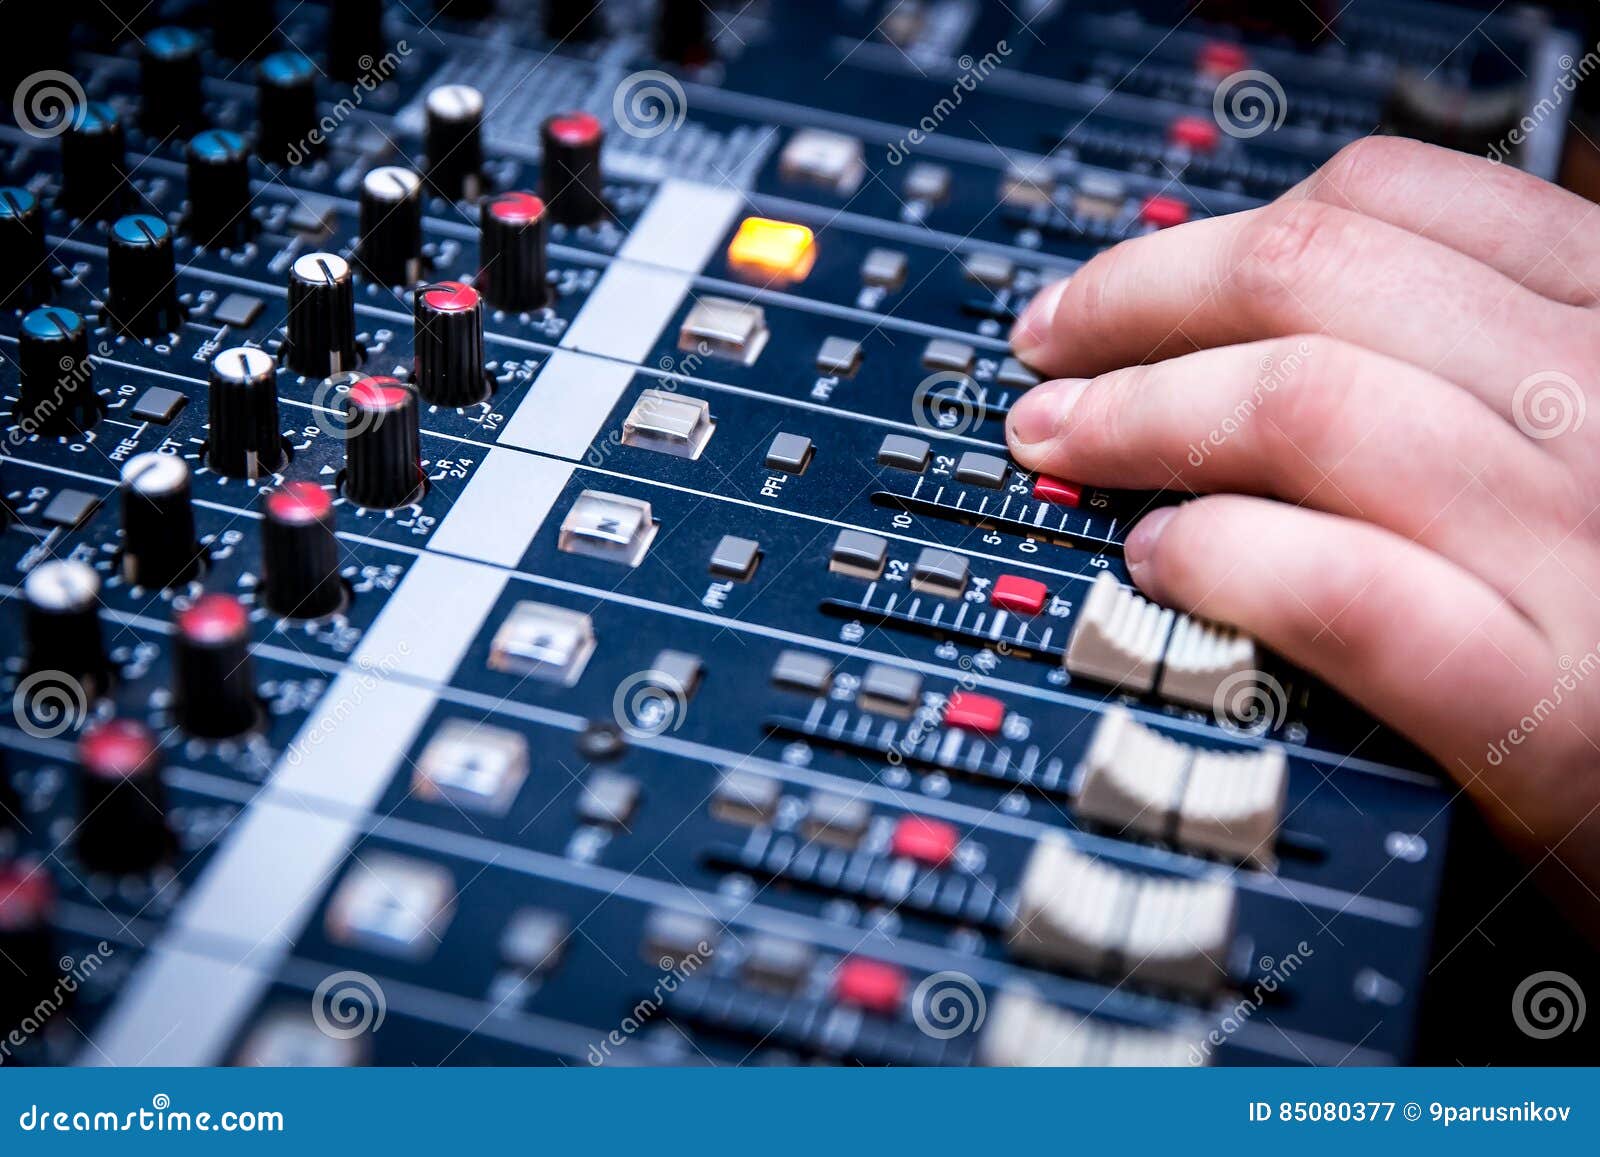 Sound Manager is Working on the Audio Mixer Stock Image - Image of ...